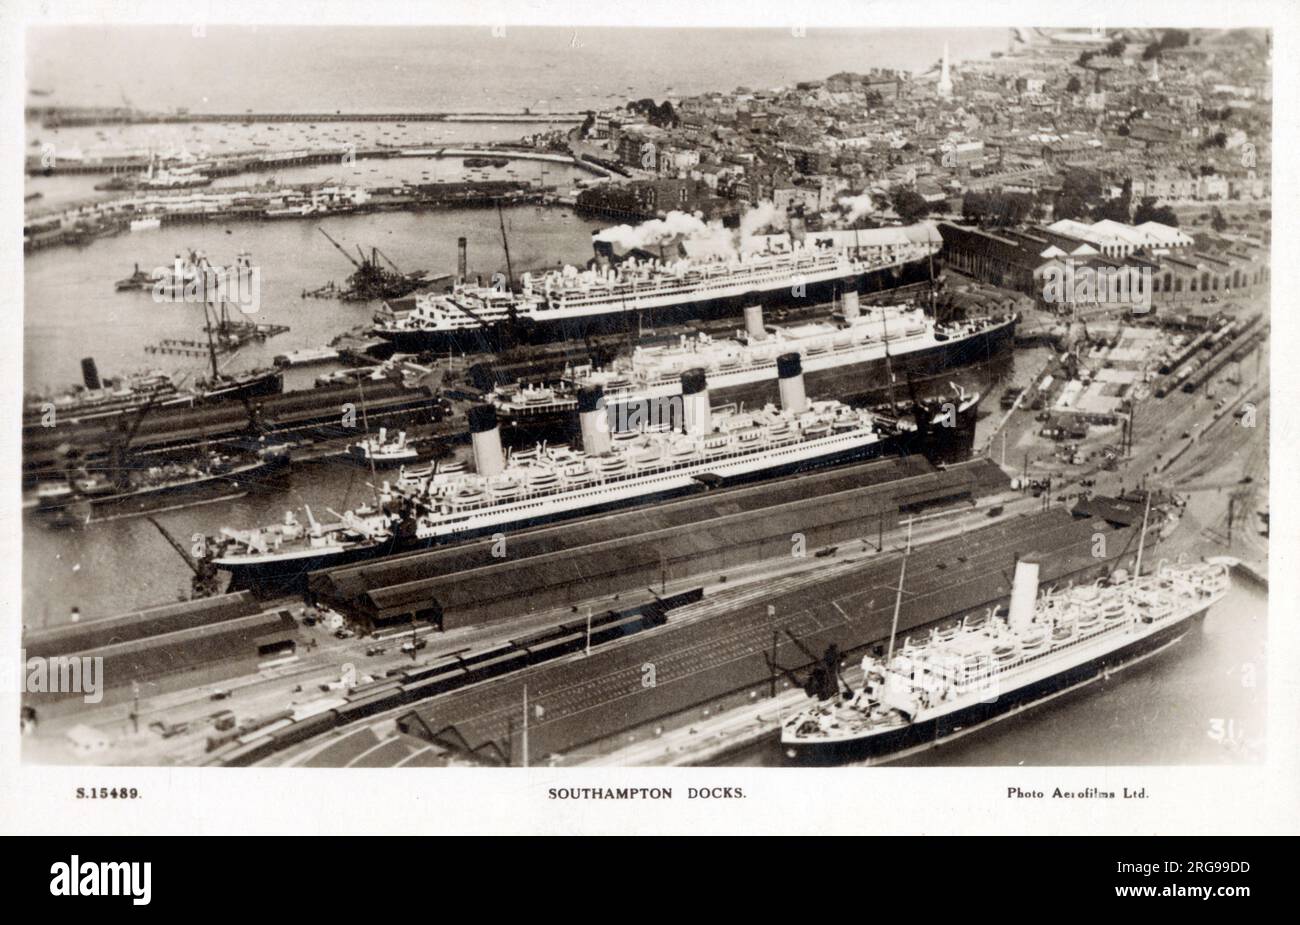 Aerial View of Southampton Docks - Great Ocean Liners awaiting departure on the Trans-Atlantic route. The ships include RMS Olympic. Stock Photo